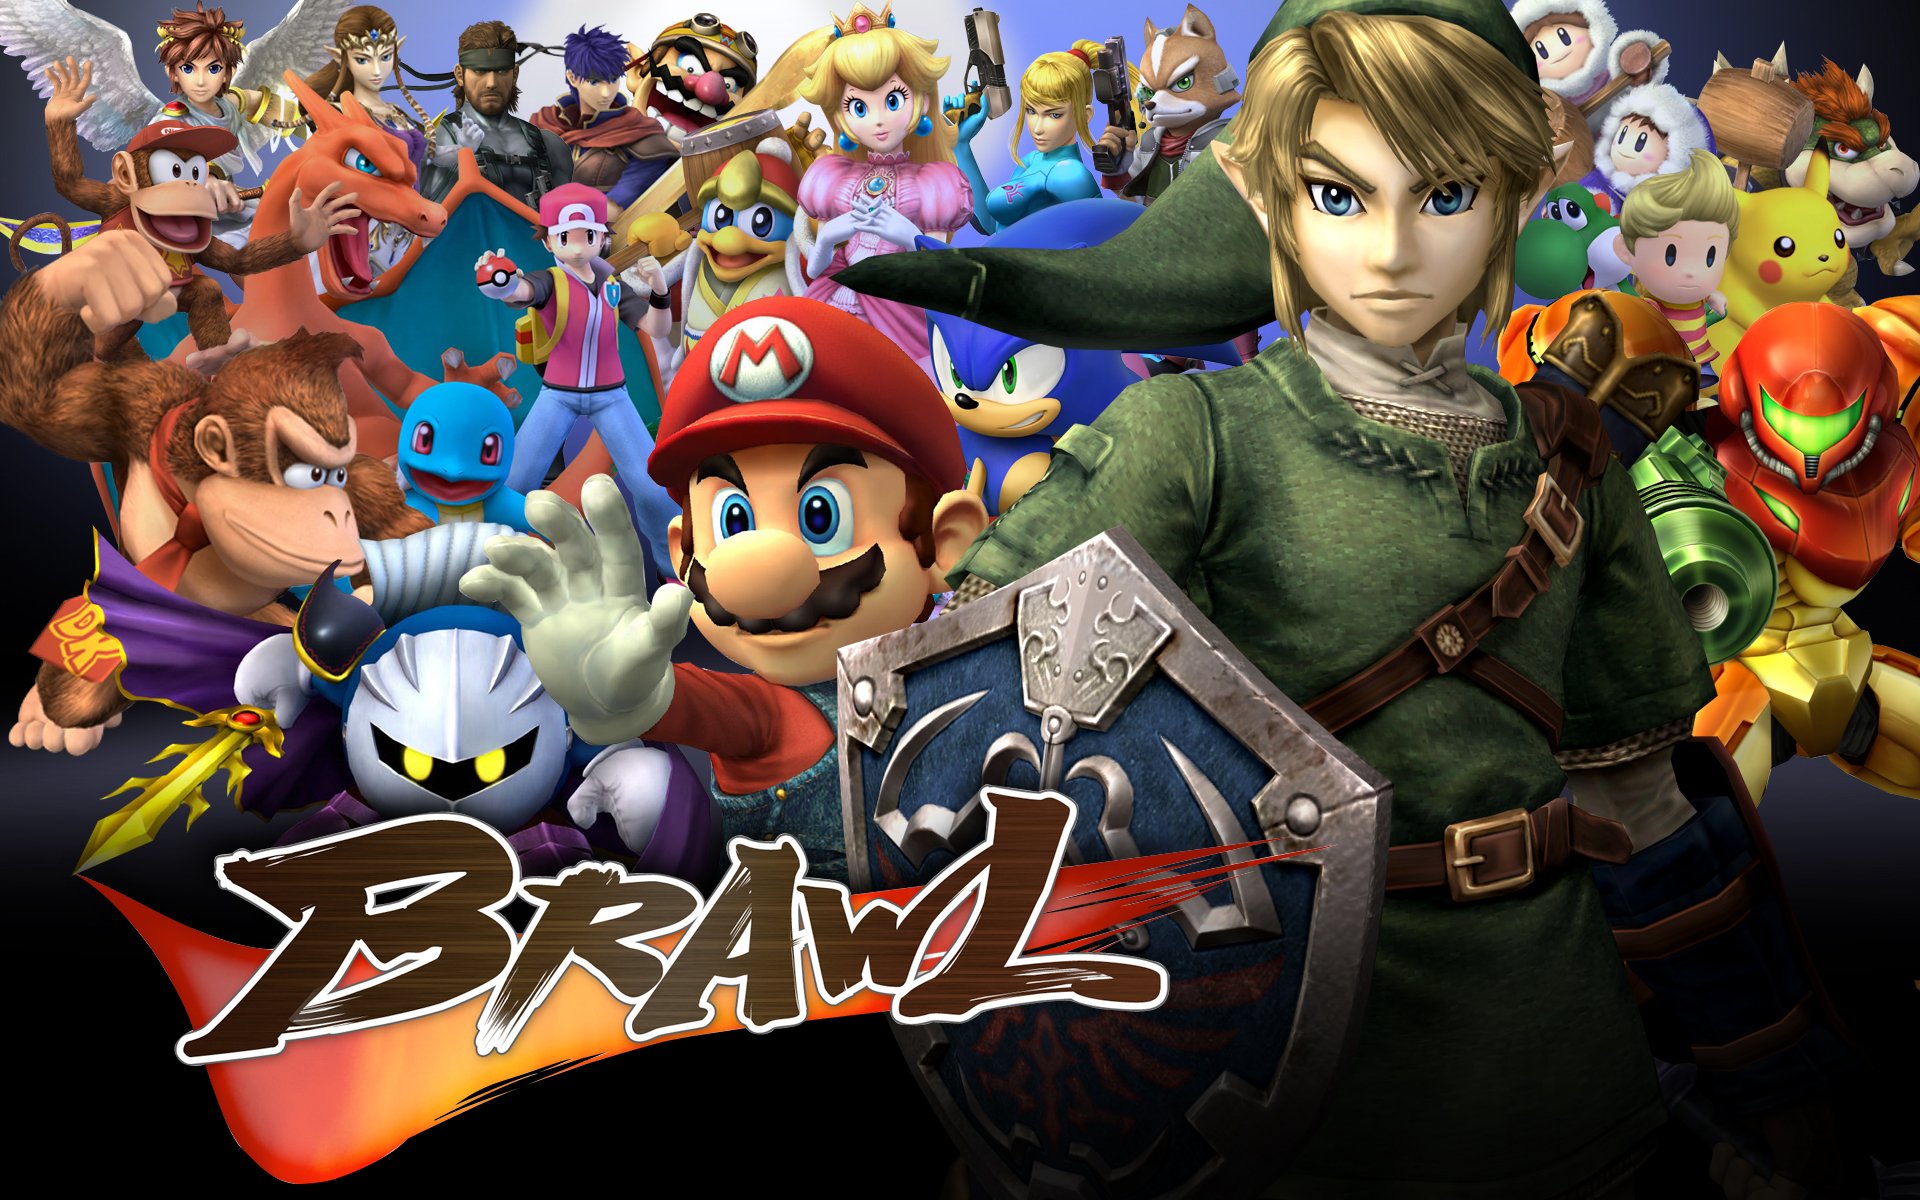 45 Super Smash Bros Brawl Hd Wallpapers Background Images.